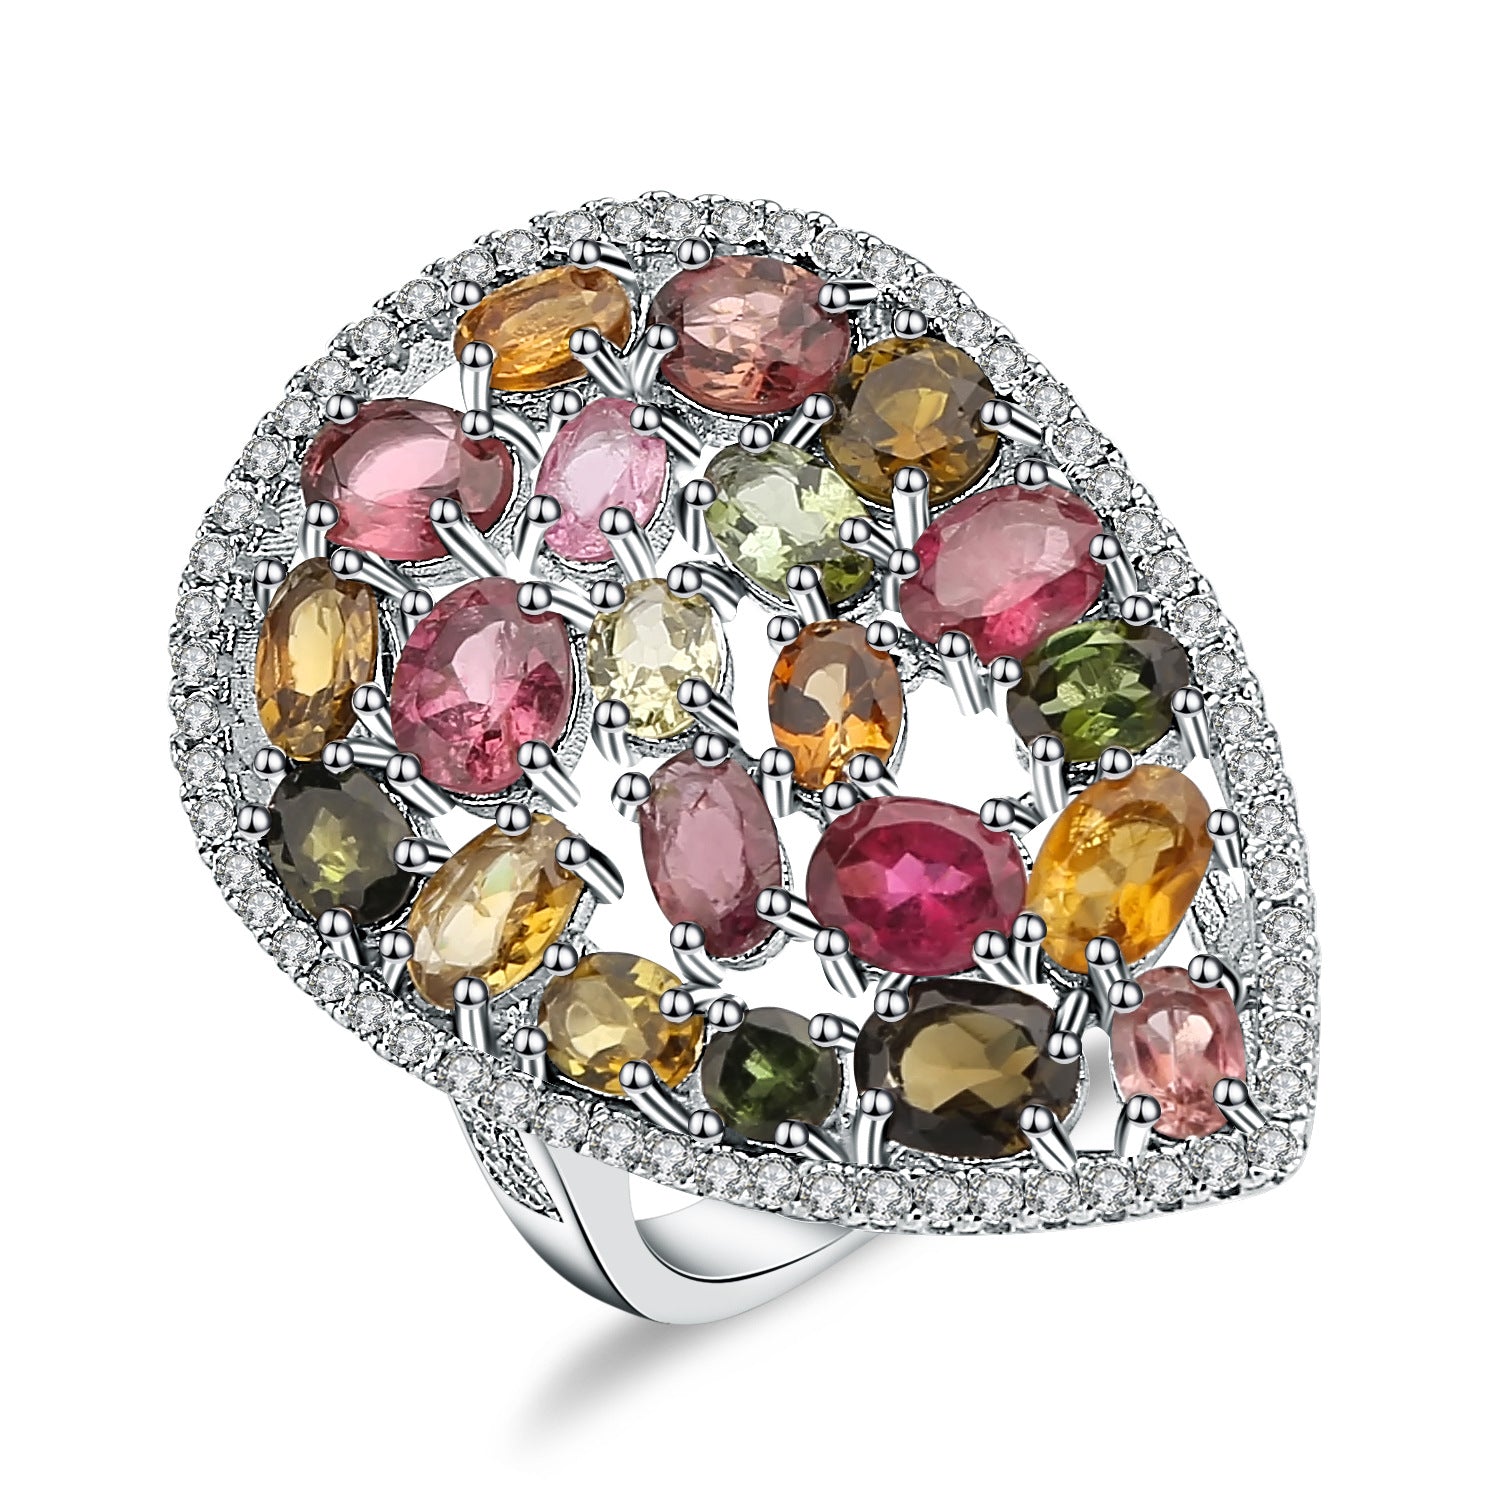 Vintage Luxury Natural Tourmaline Colourful Gemstone Silver Ring for Women